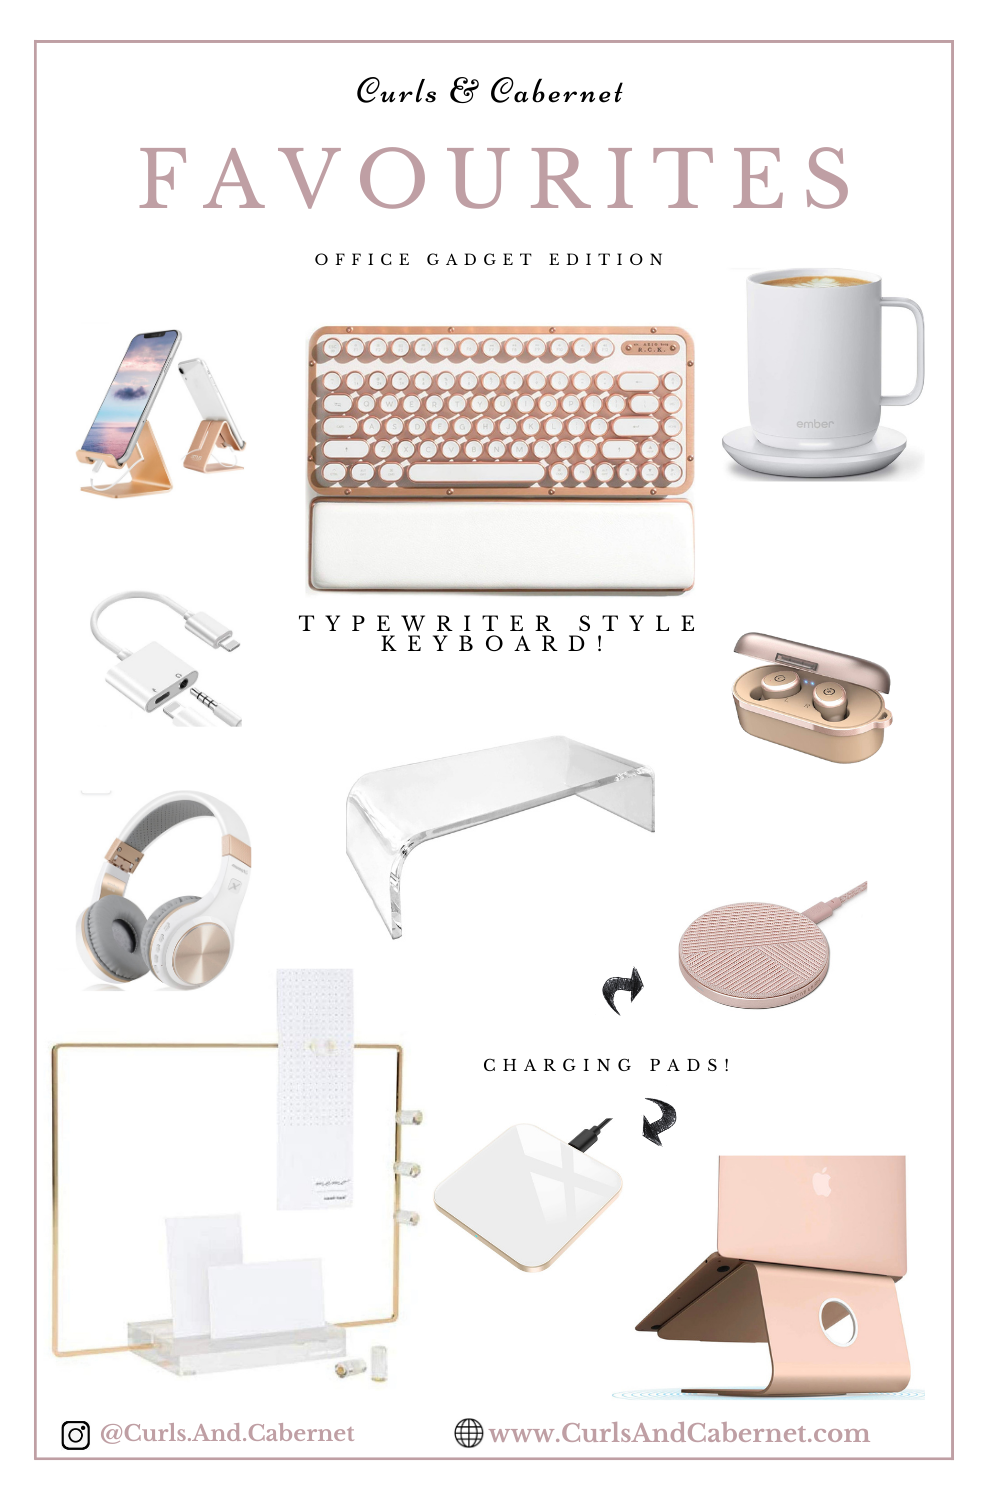 Favourite: Chic Office Gadgets and Gizmos